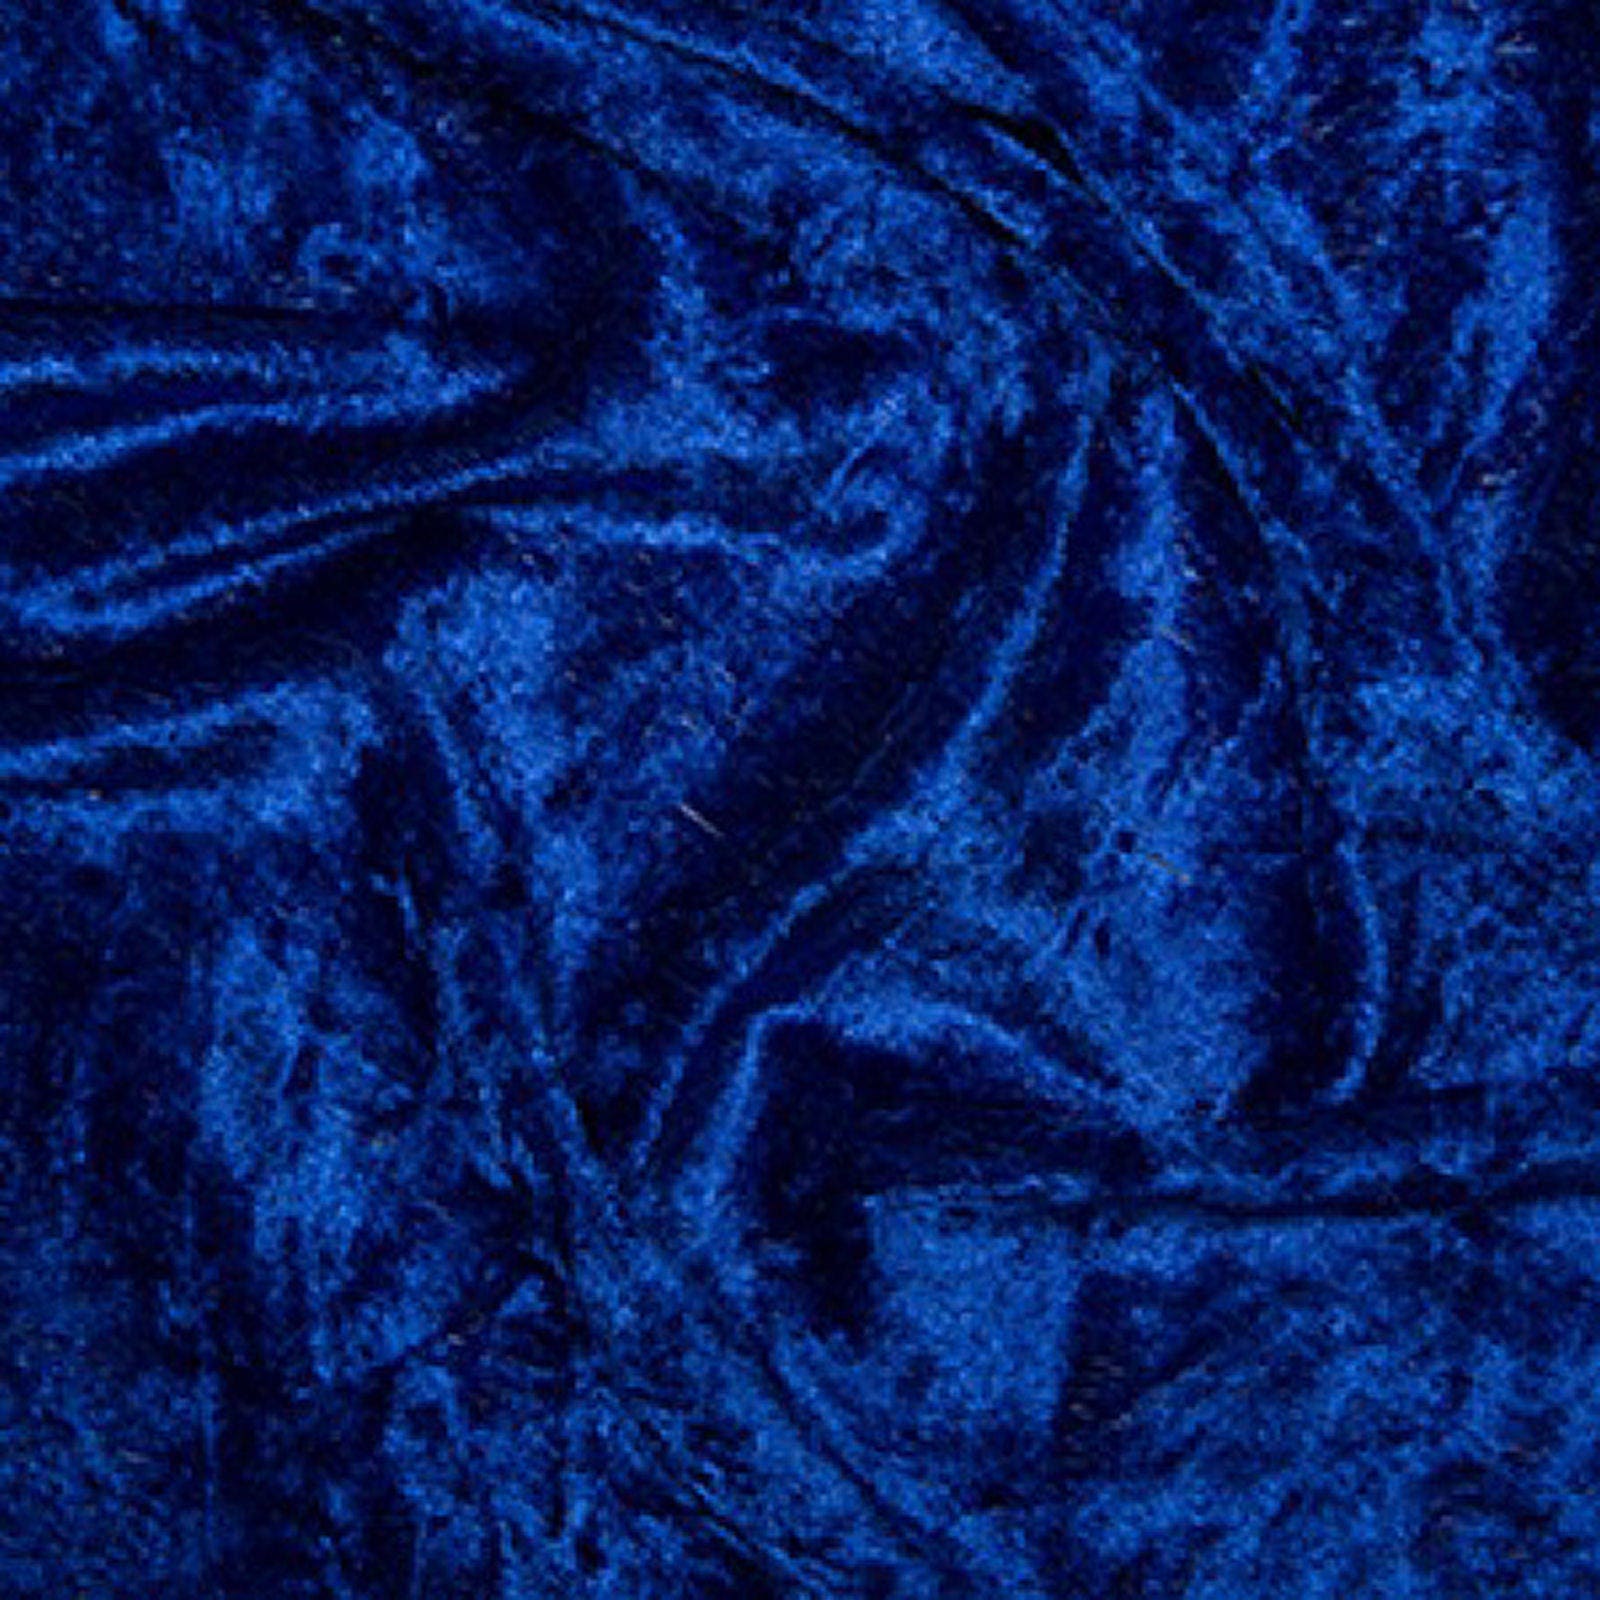 Wine 59 Wide Crushed Stretch Panne Velvet Velour Fabric Sold By The Yard.